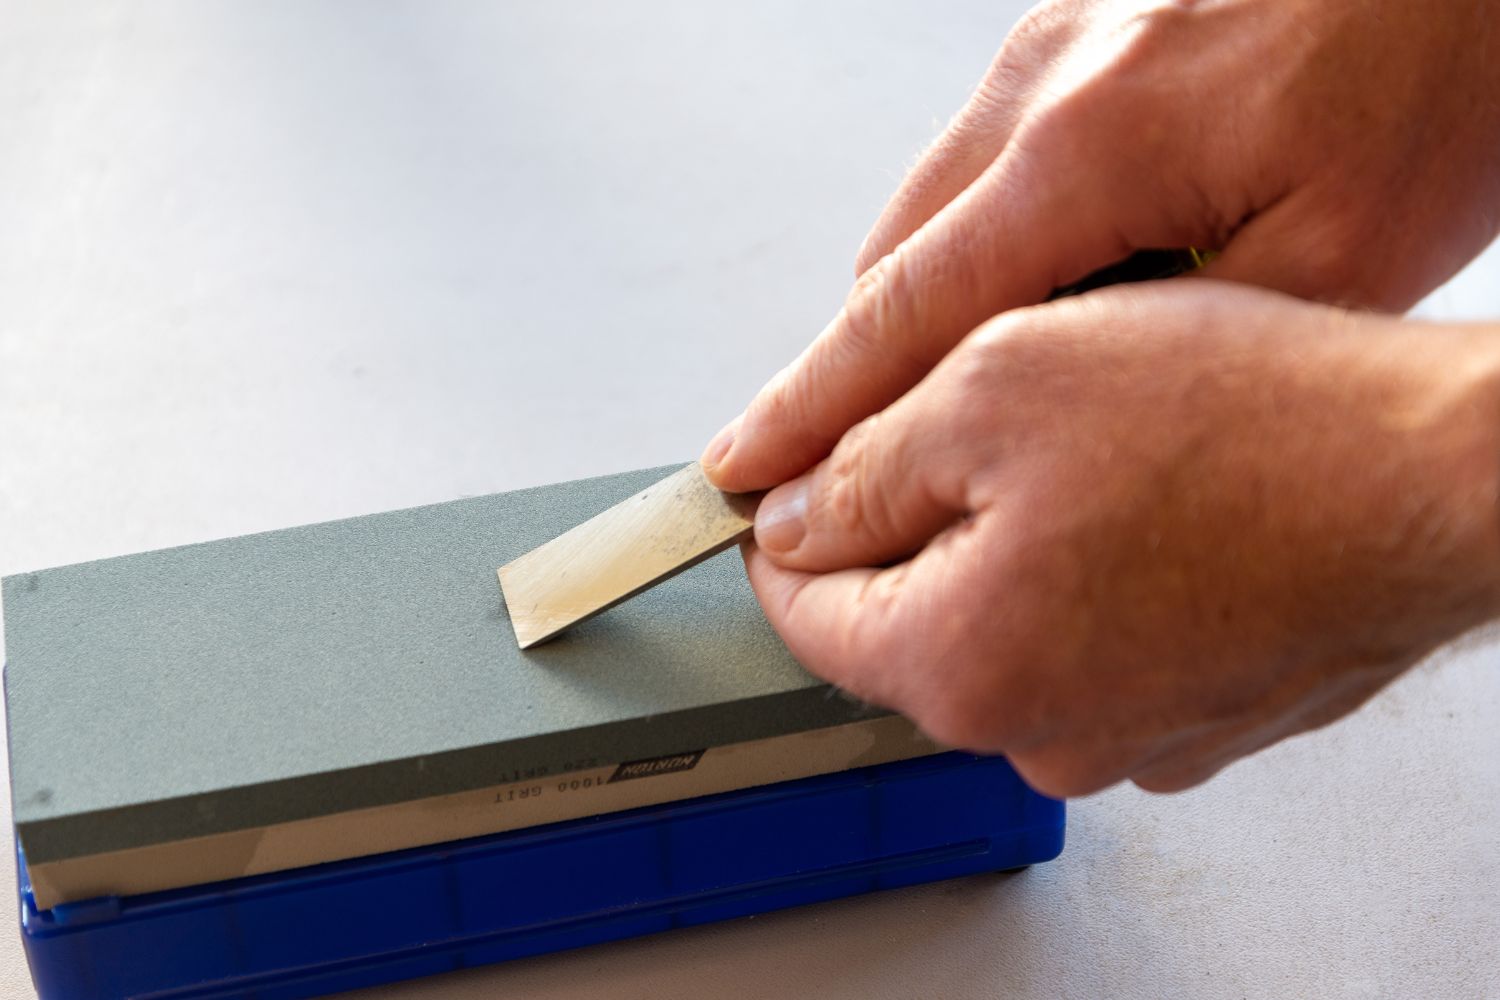 A person using the best sharpening stone option to grind the edge of small blade to maintain a sharp edge.